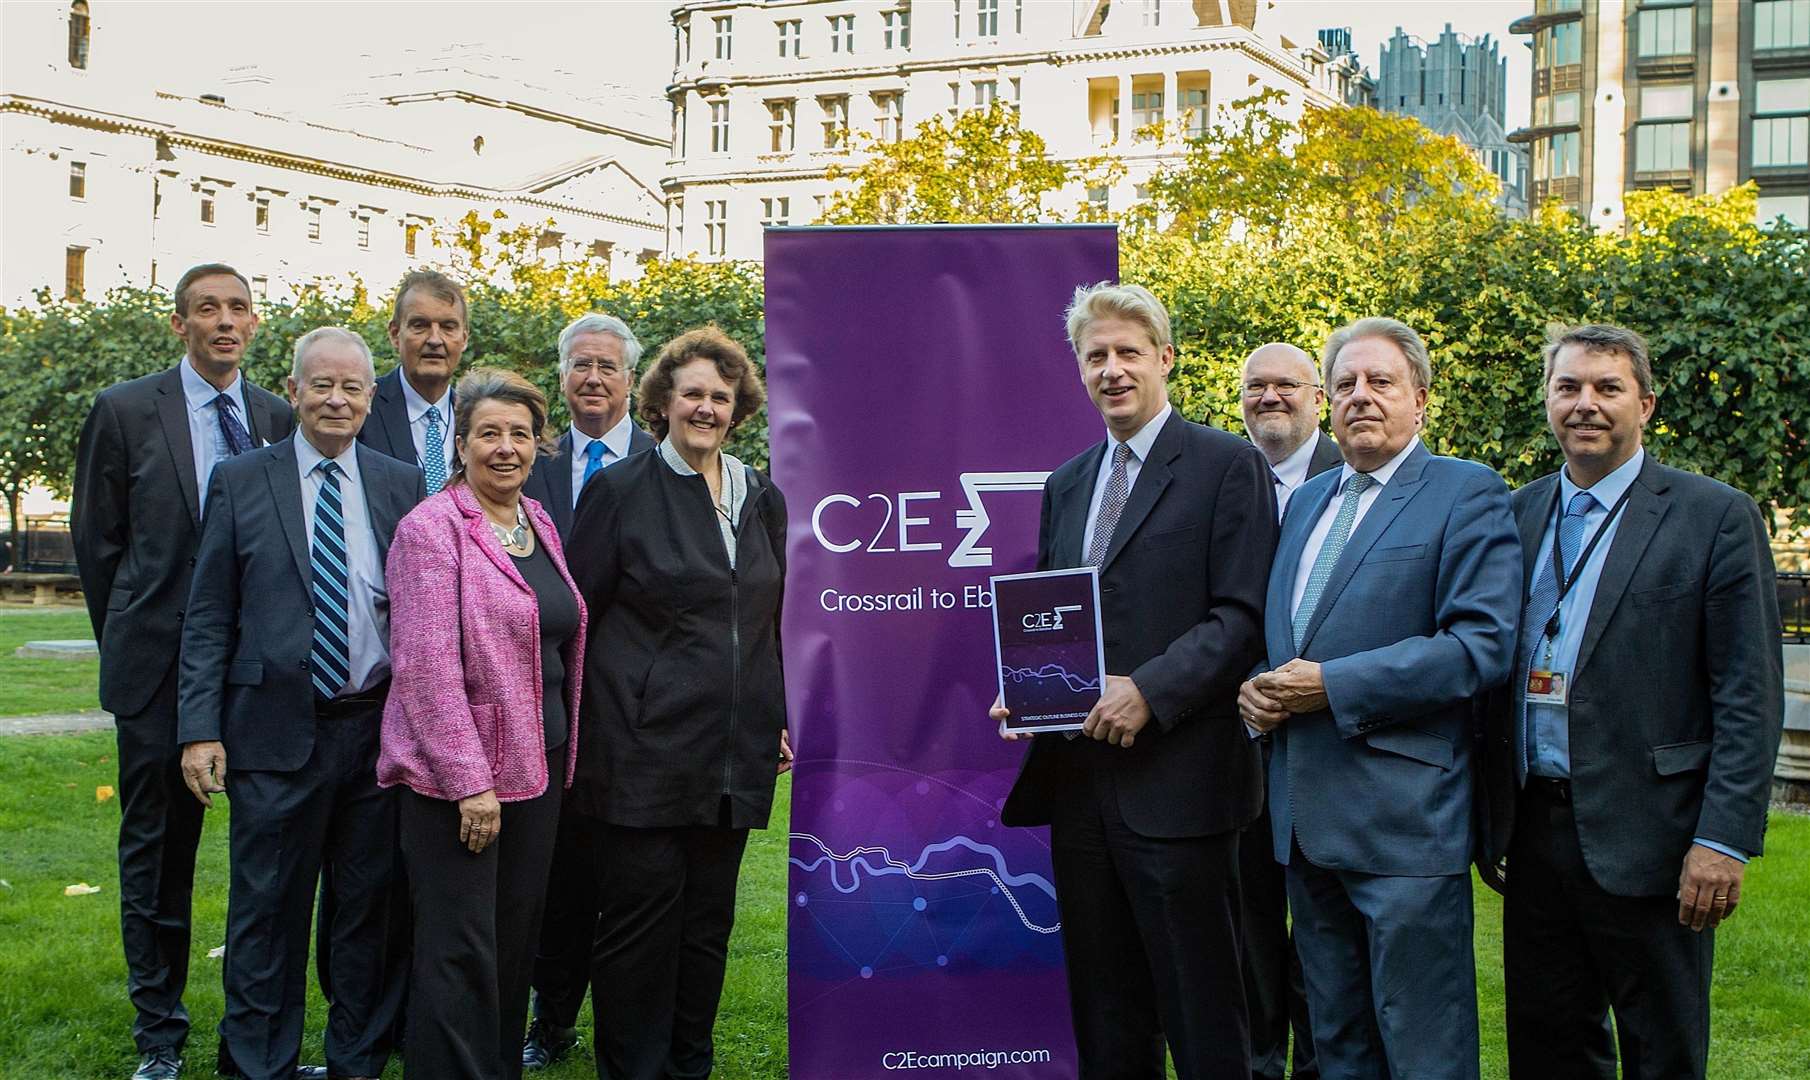 The C2E Partnership has submitted its business case for an extension of Crossrail to Kent to the government for consideration. Photo: Jonathan Andrew